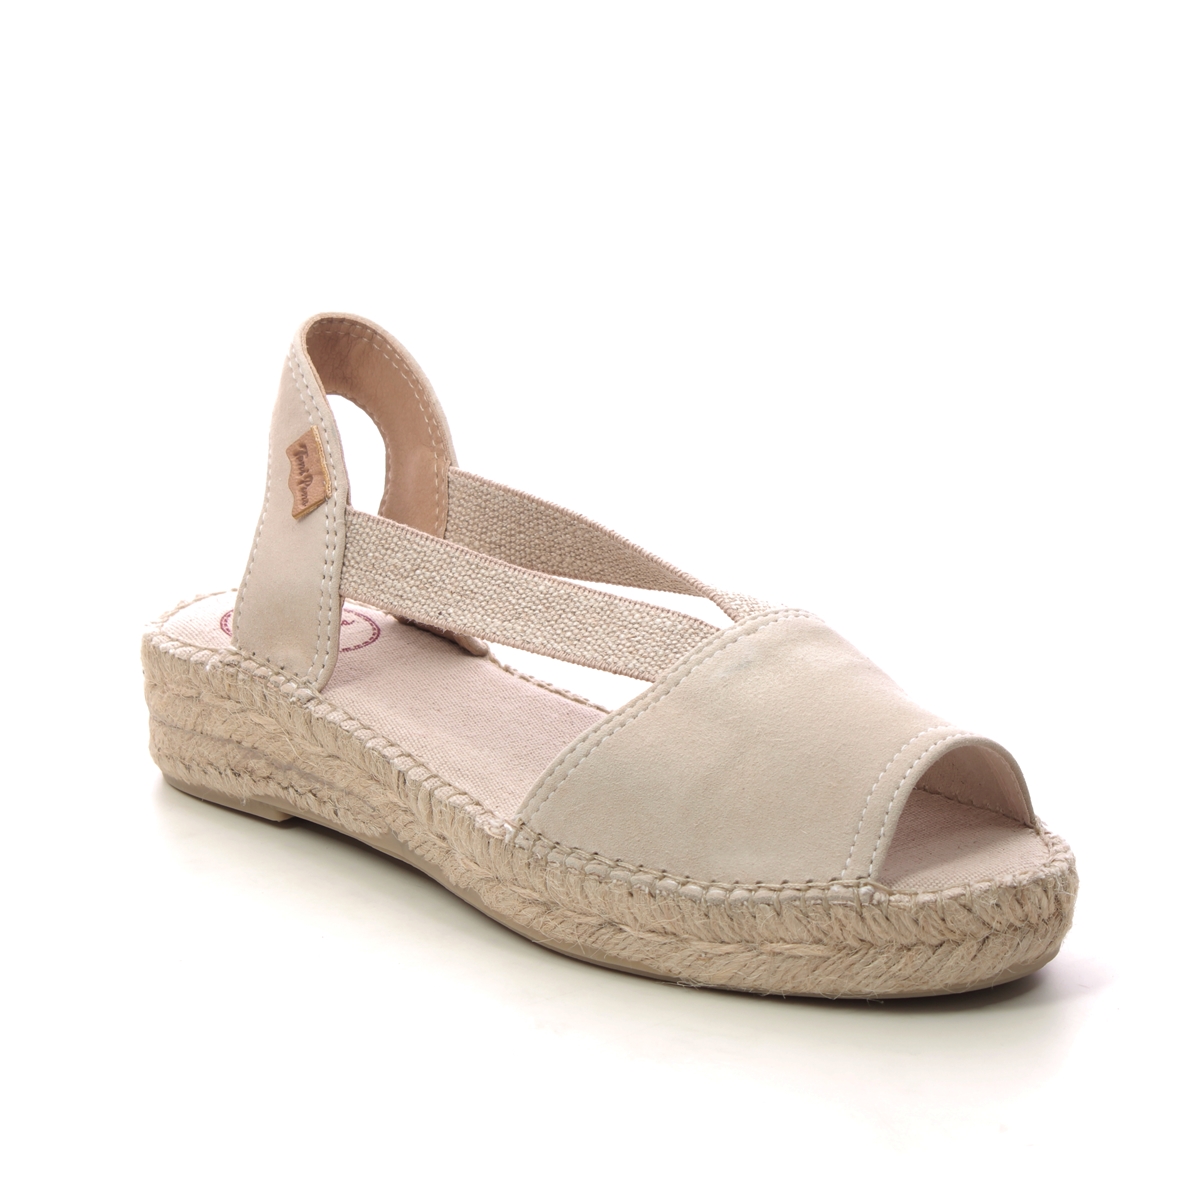 Toni Pons Ella Stone Womens Espadrilles 3002-50 in a Plain Leather and Textile in Size 42